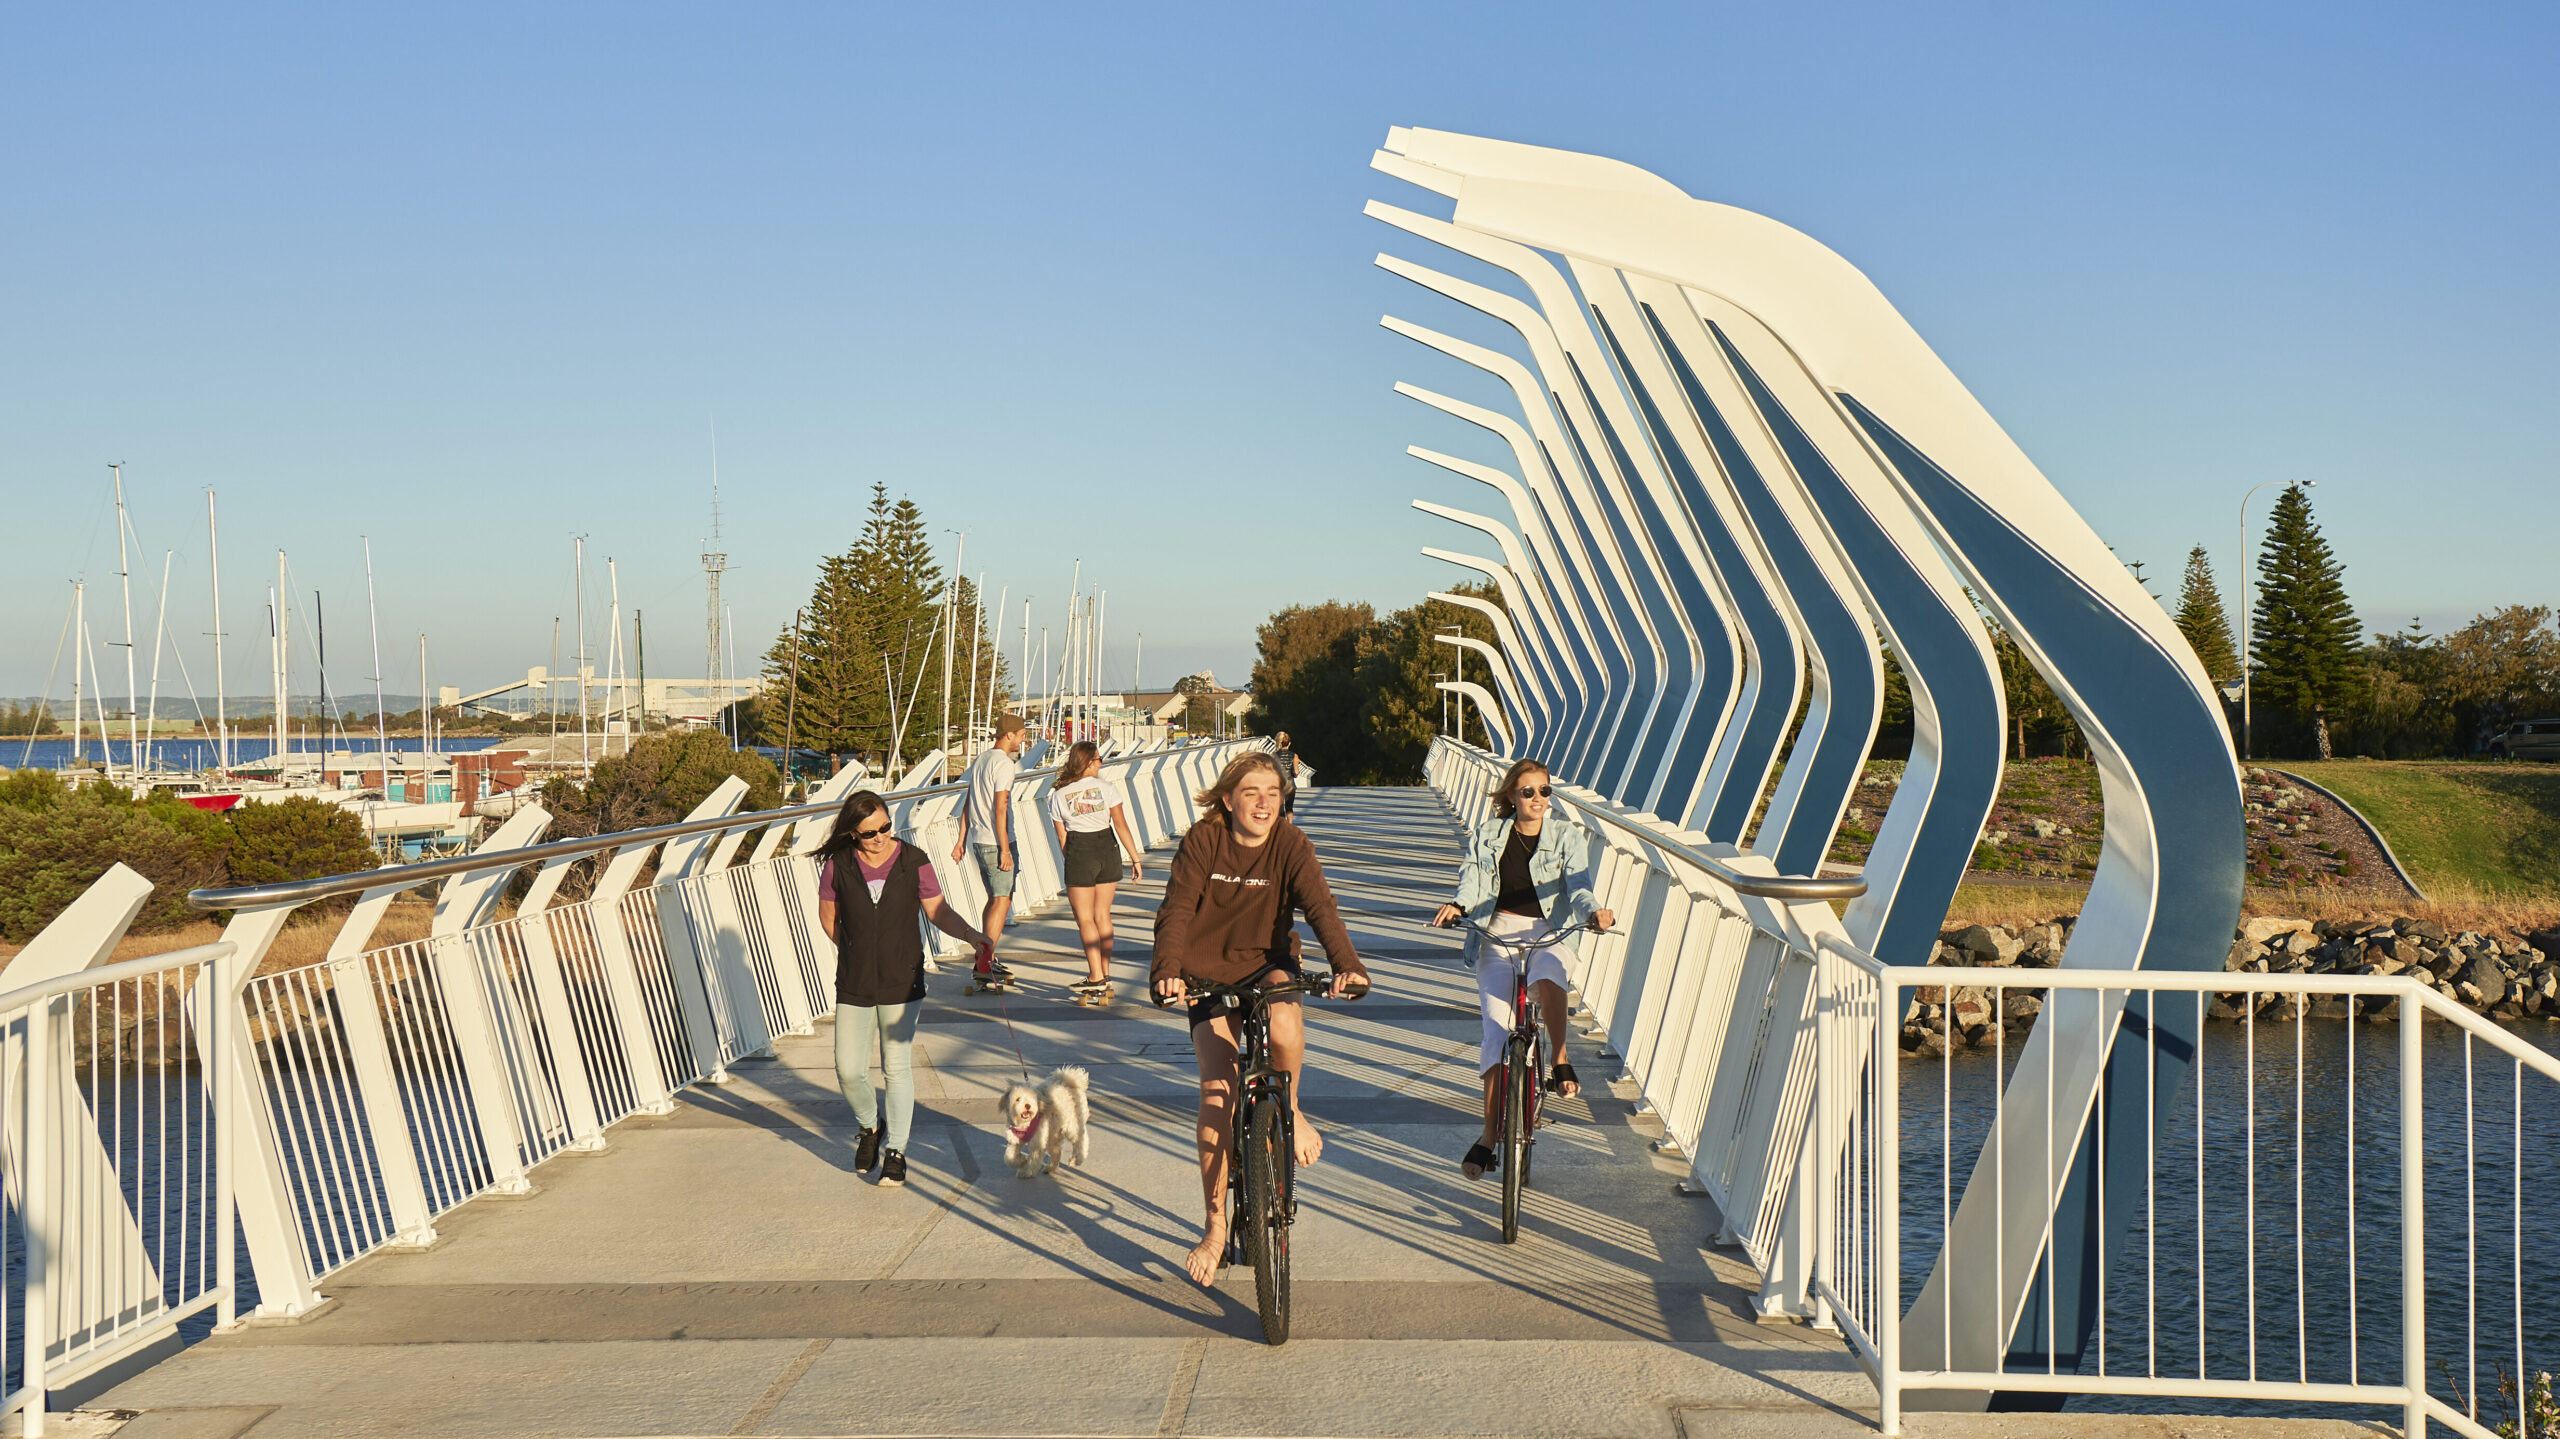 Two teenagers riding bikes along the Koombana footbridge and a woman walking a small fluffy white dog. A young man and woman in the background walking in the opposite direction. Blue sky.